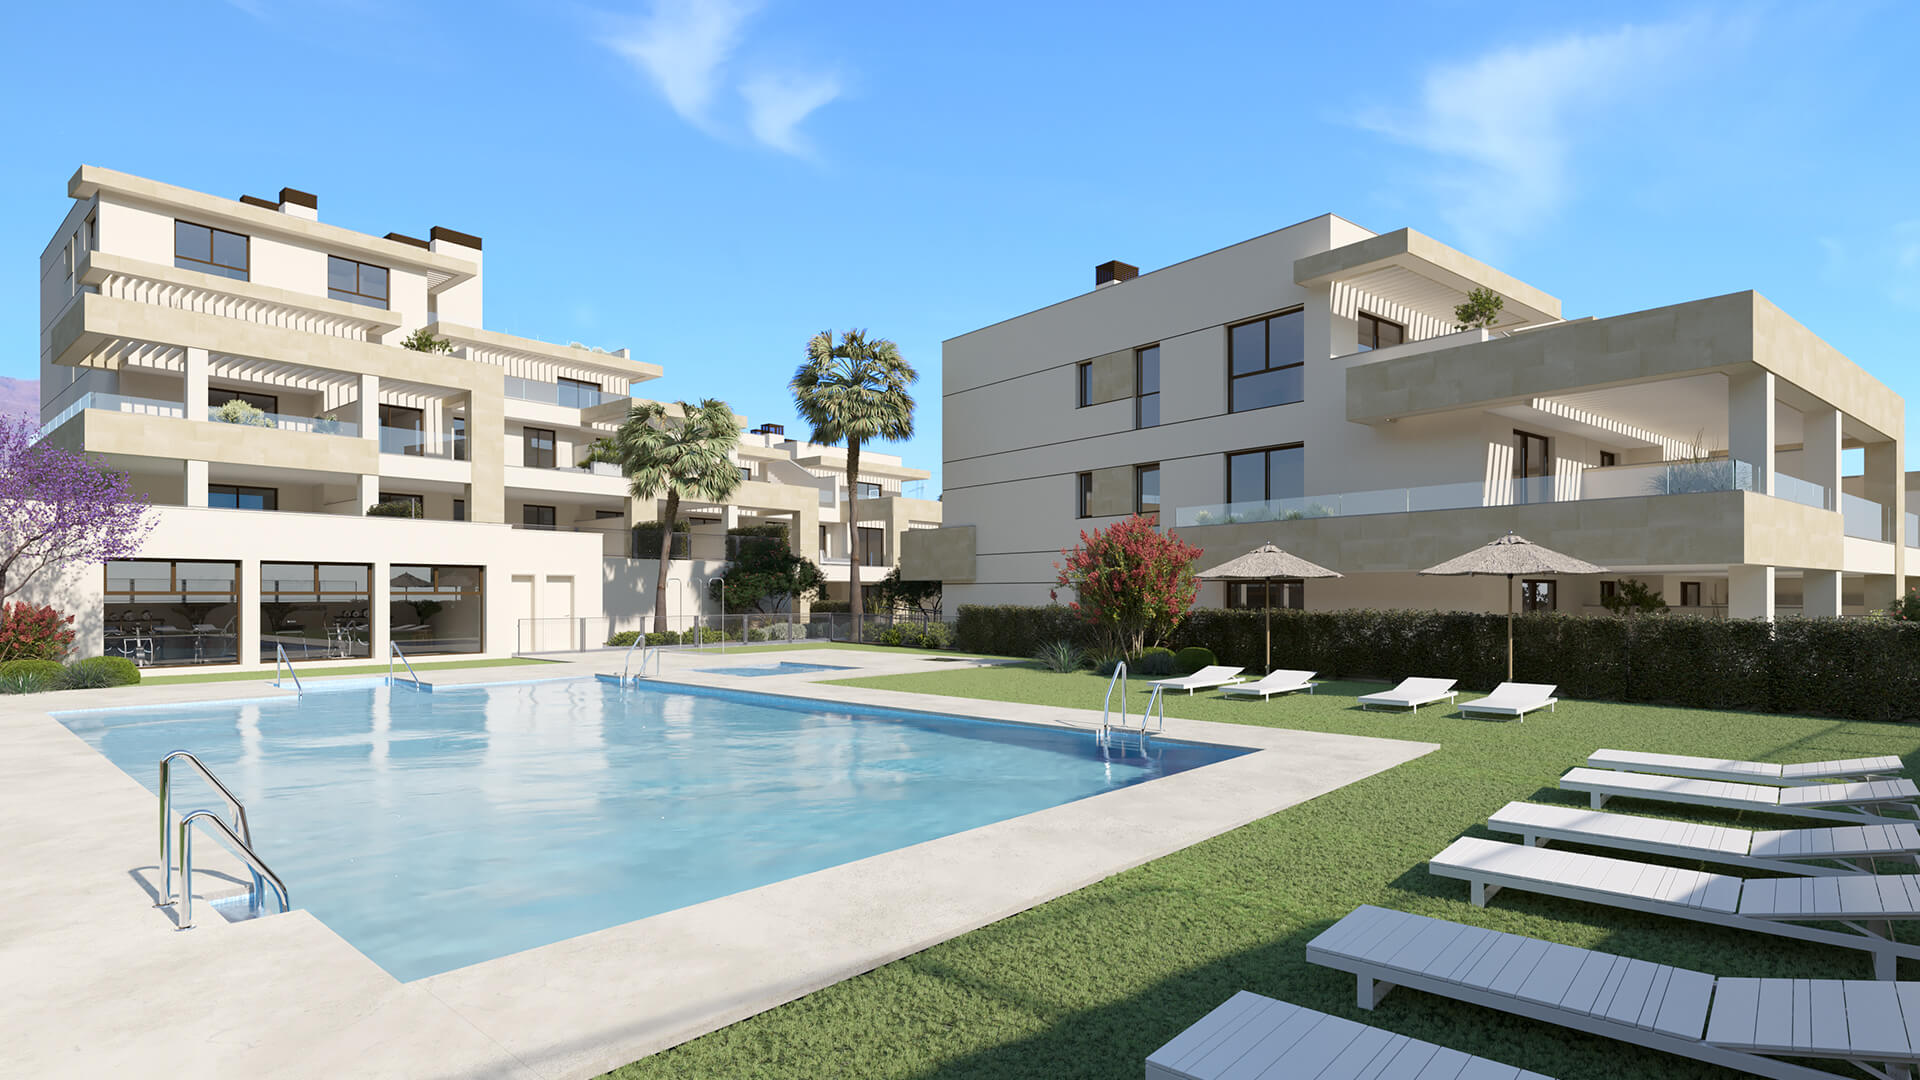 Bayside Homes - New Apartments in Estepona